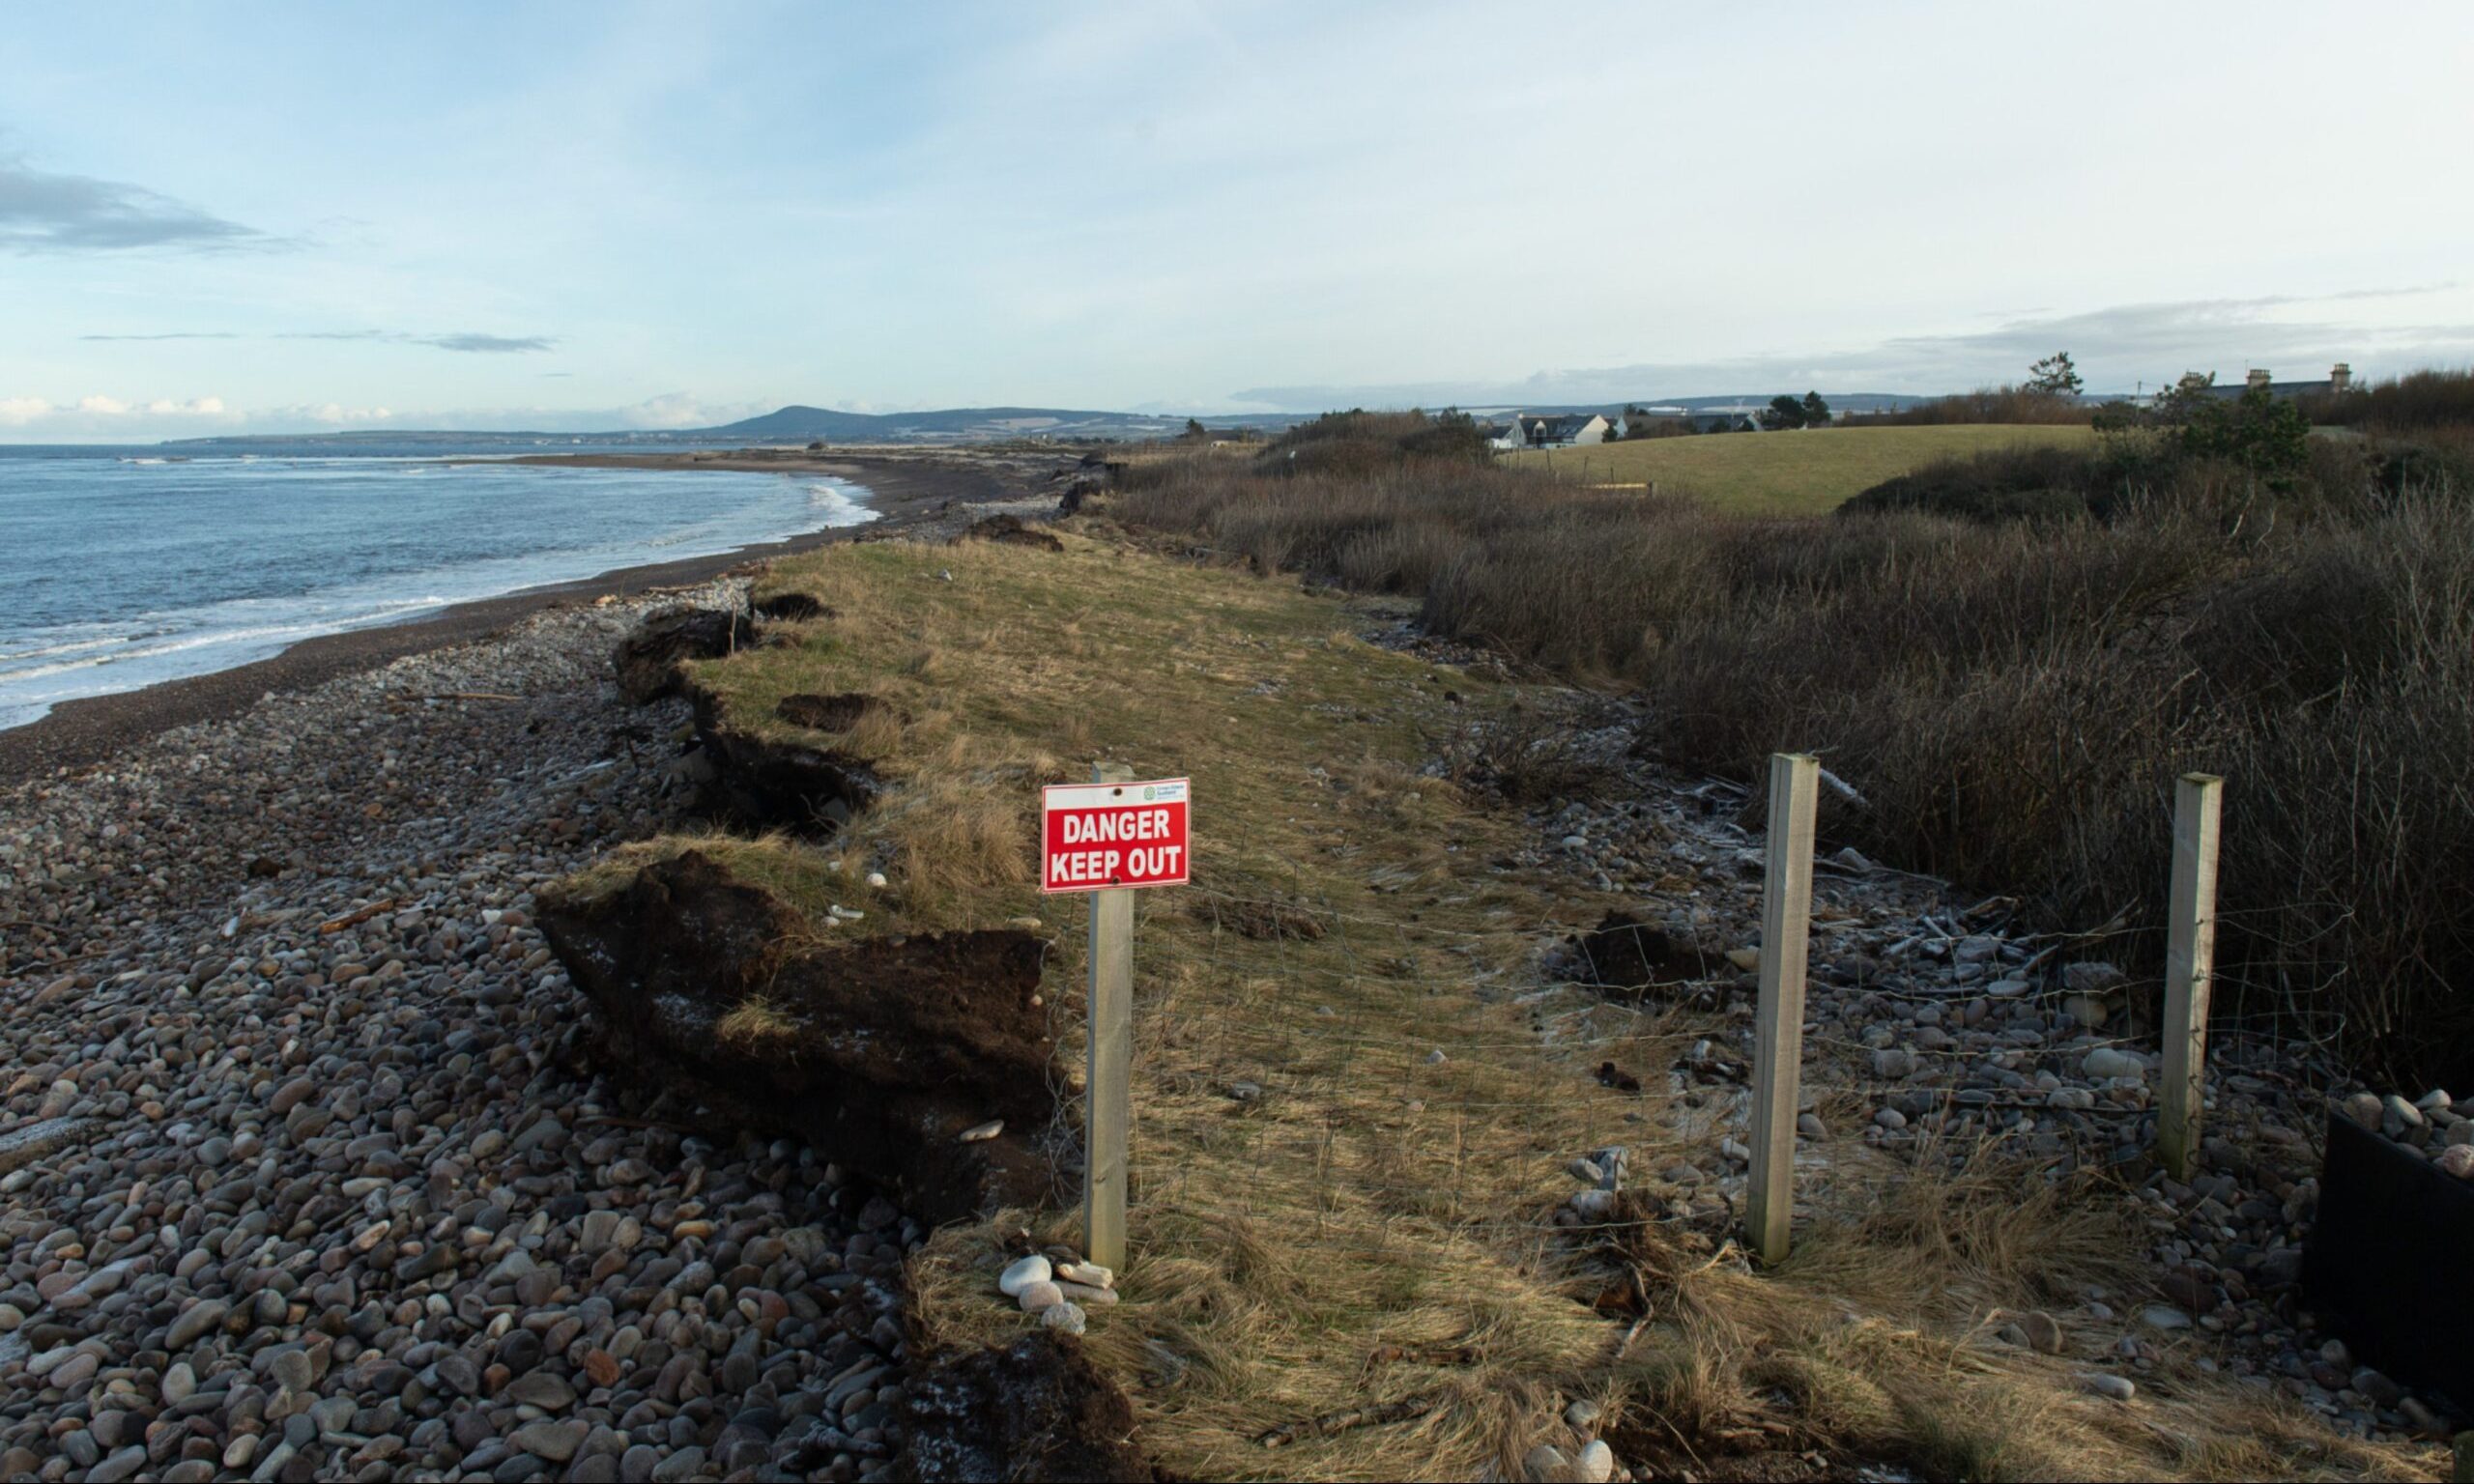 Kingston coastline with "danger keep out" sign visible. 